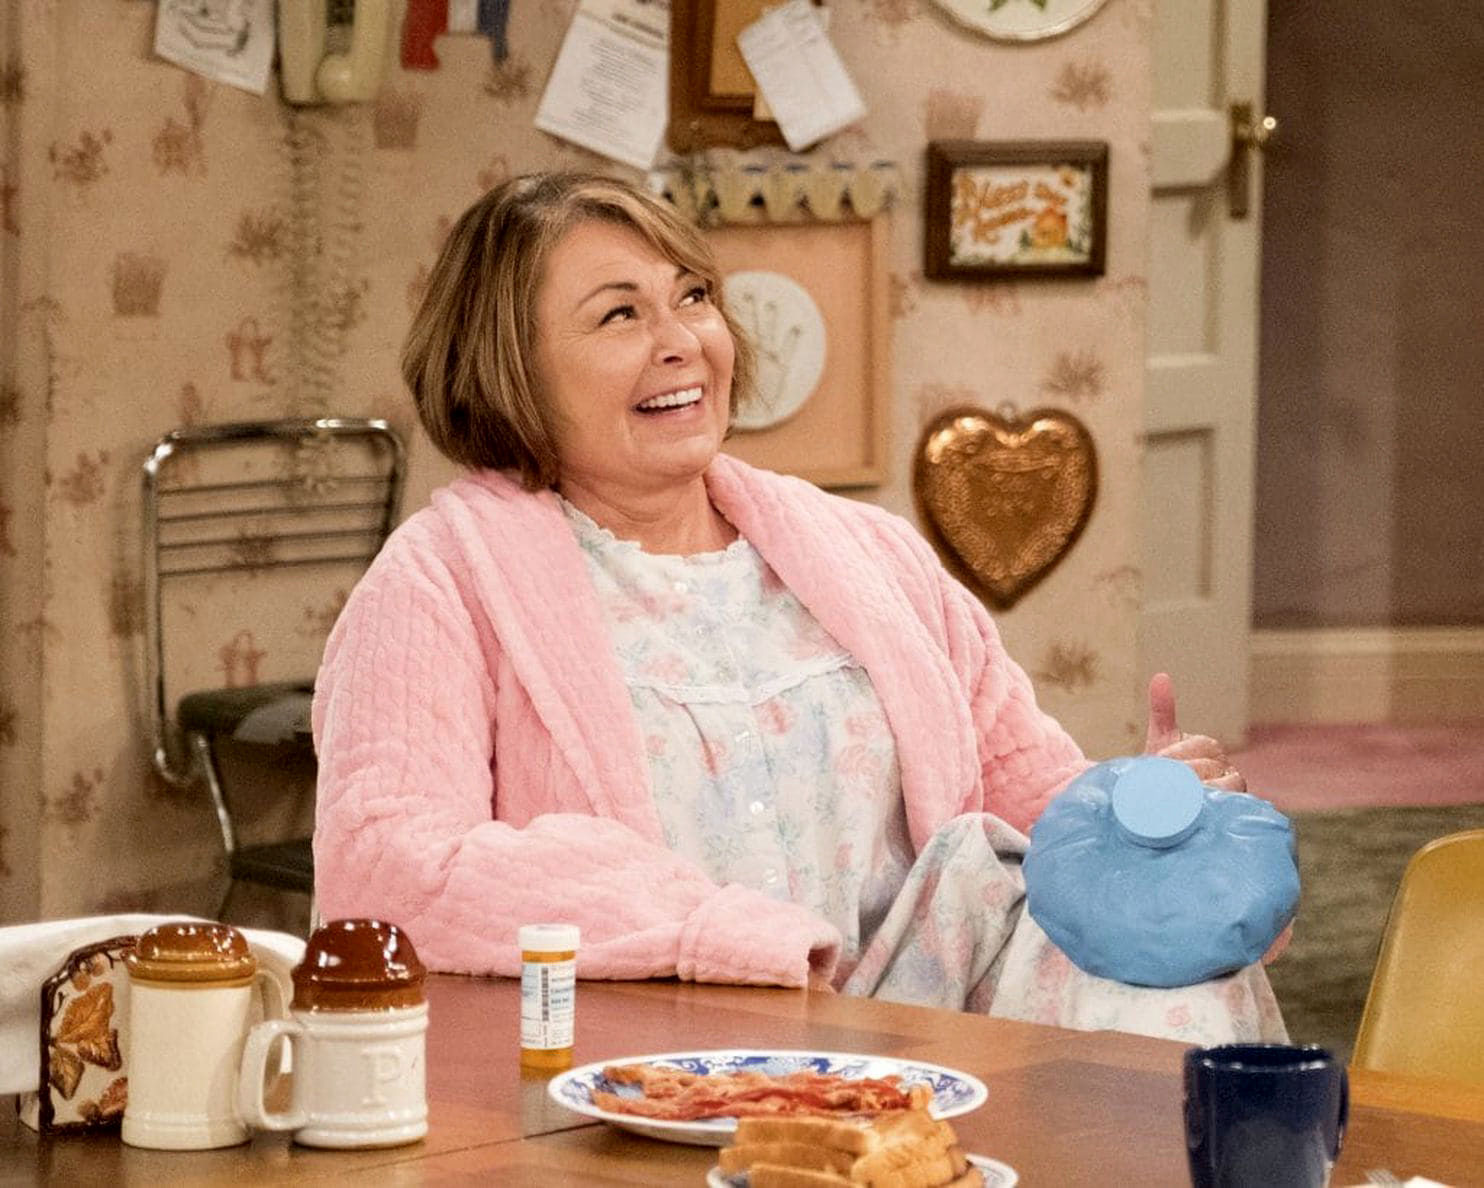 Racism is not a known side effect, Ambien maker says after Roseanne blames it for tweets Lifestyle postguam